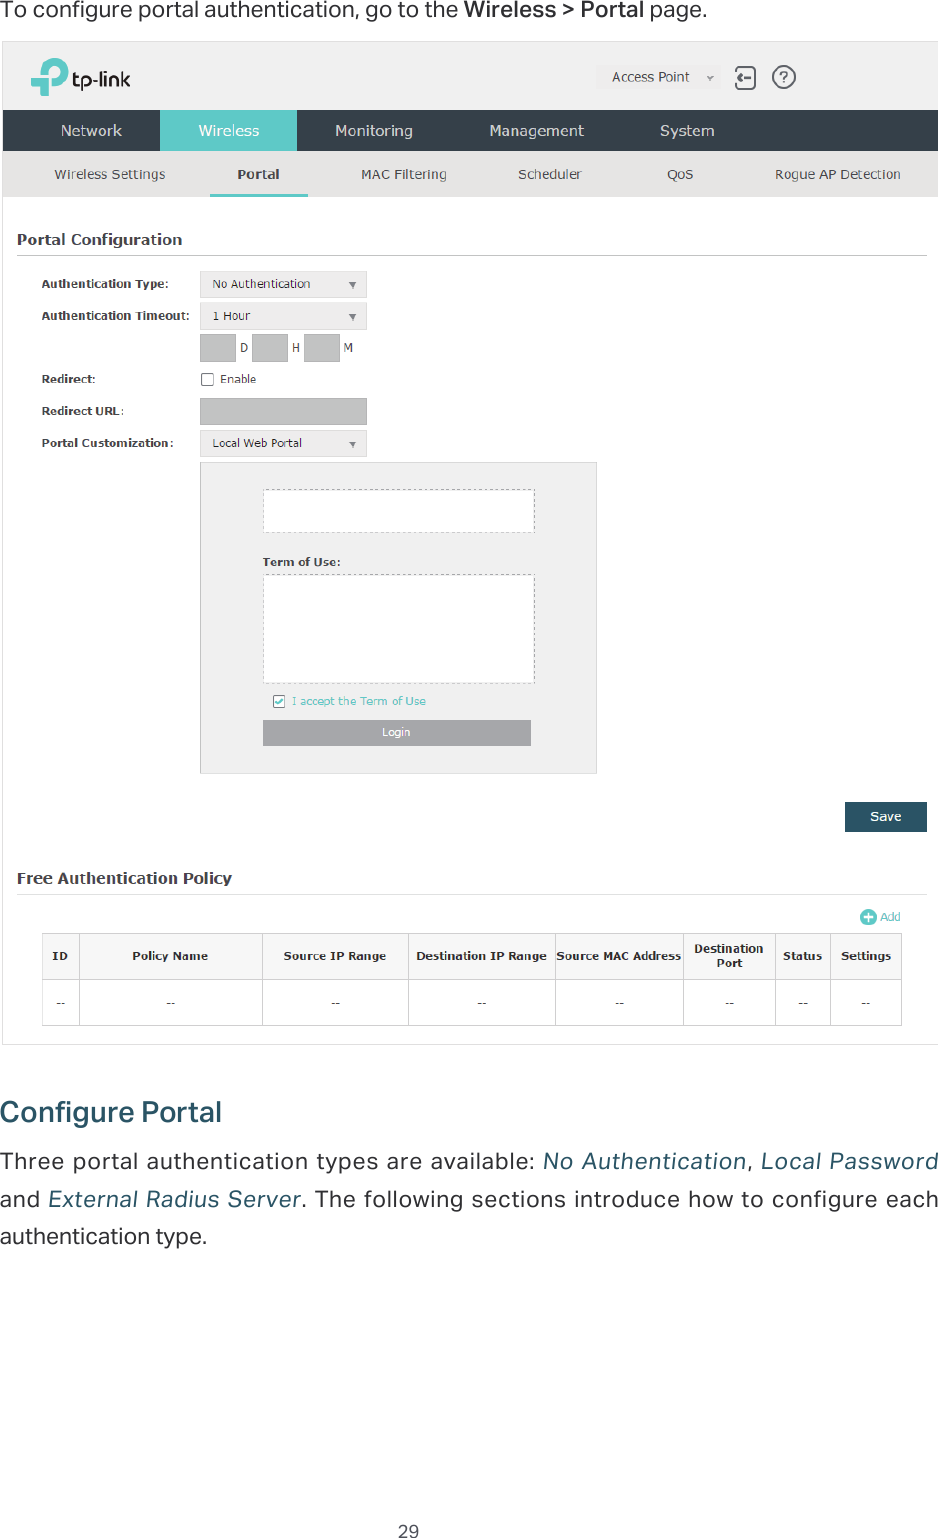  29To configure portal authentication, go to the Wireless &gt; Portal page.Configure PortalThree portal authentication types are available: No Authentication, Local Password and External Radius Server. The following sections introduce how to configure each authentication type.